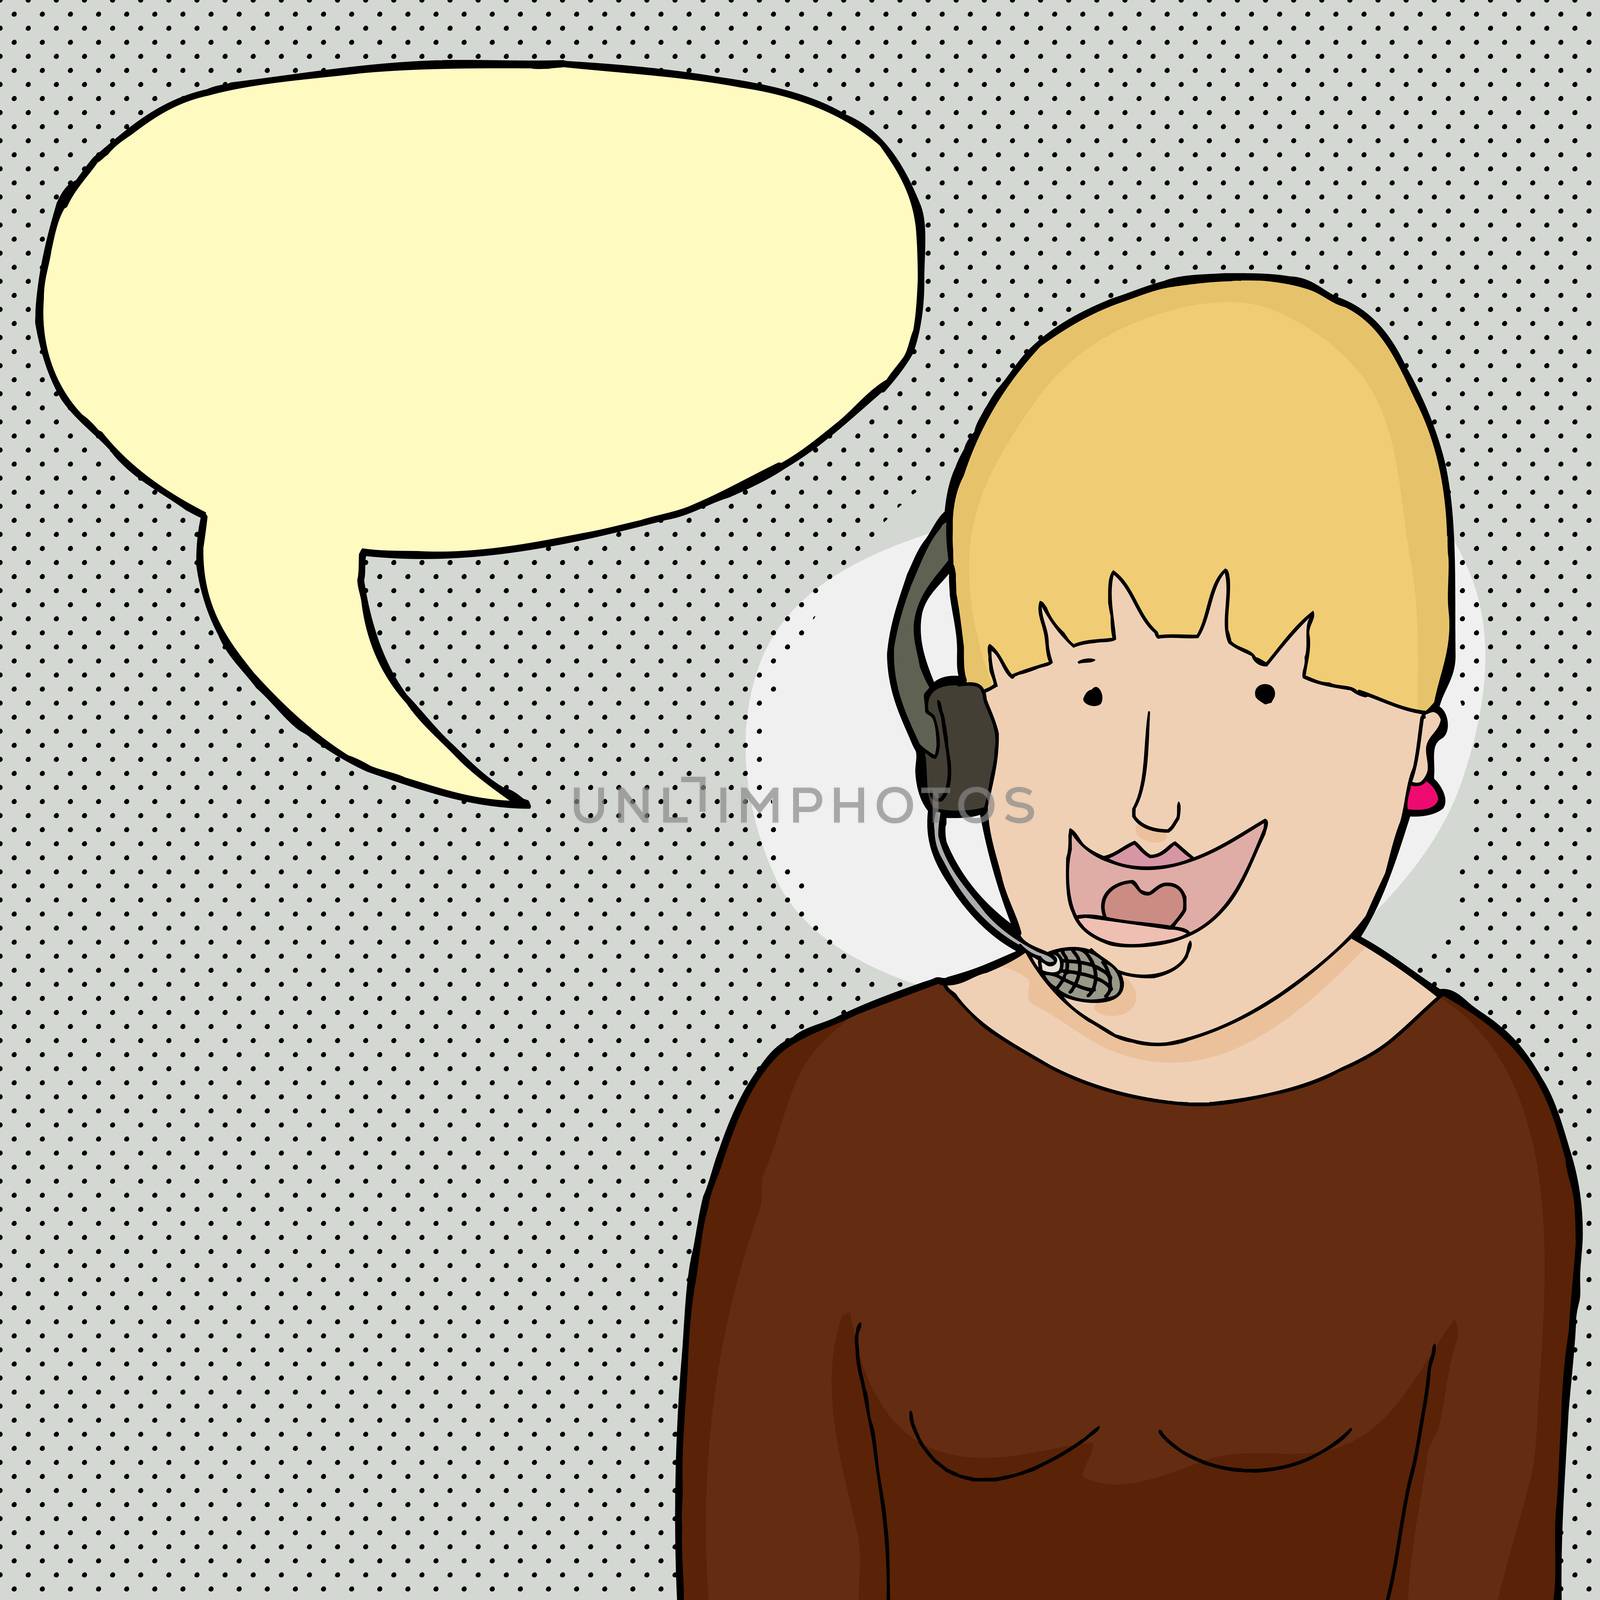 Cute telemarketing phone operator with word bubble